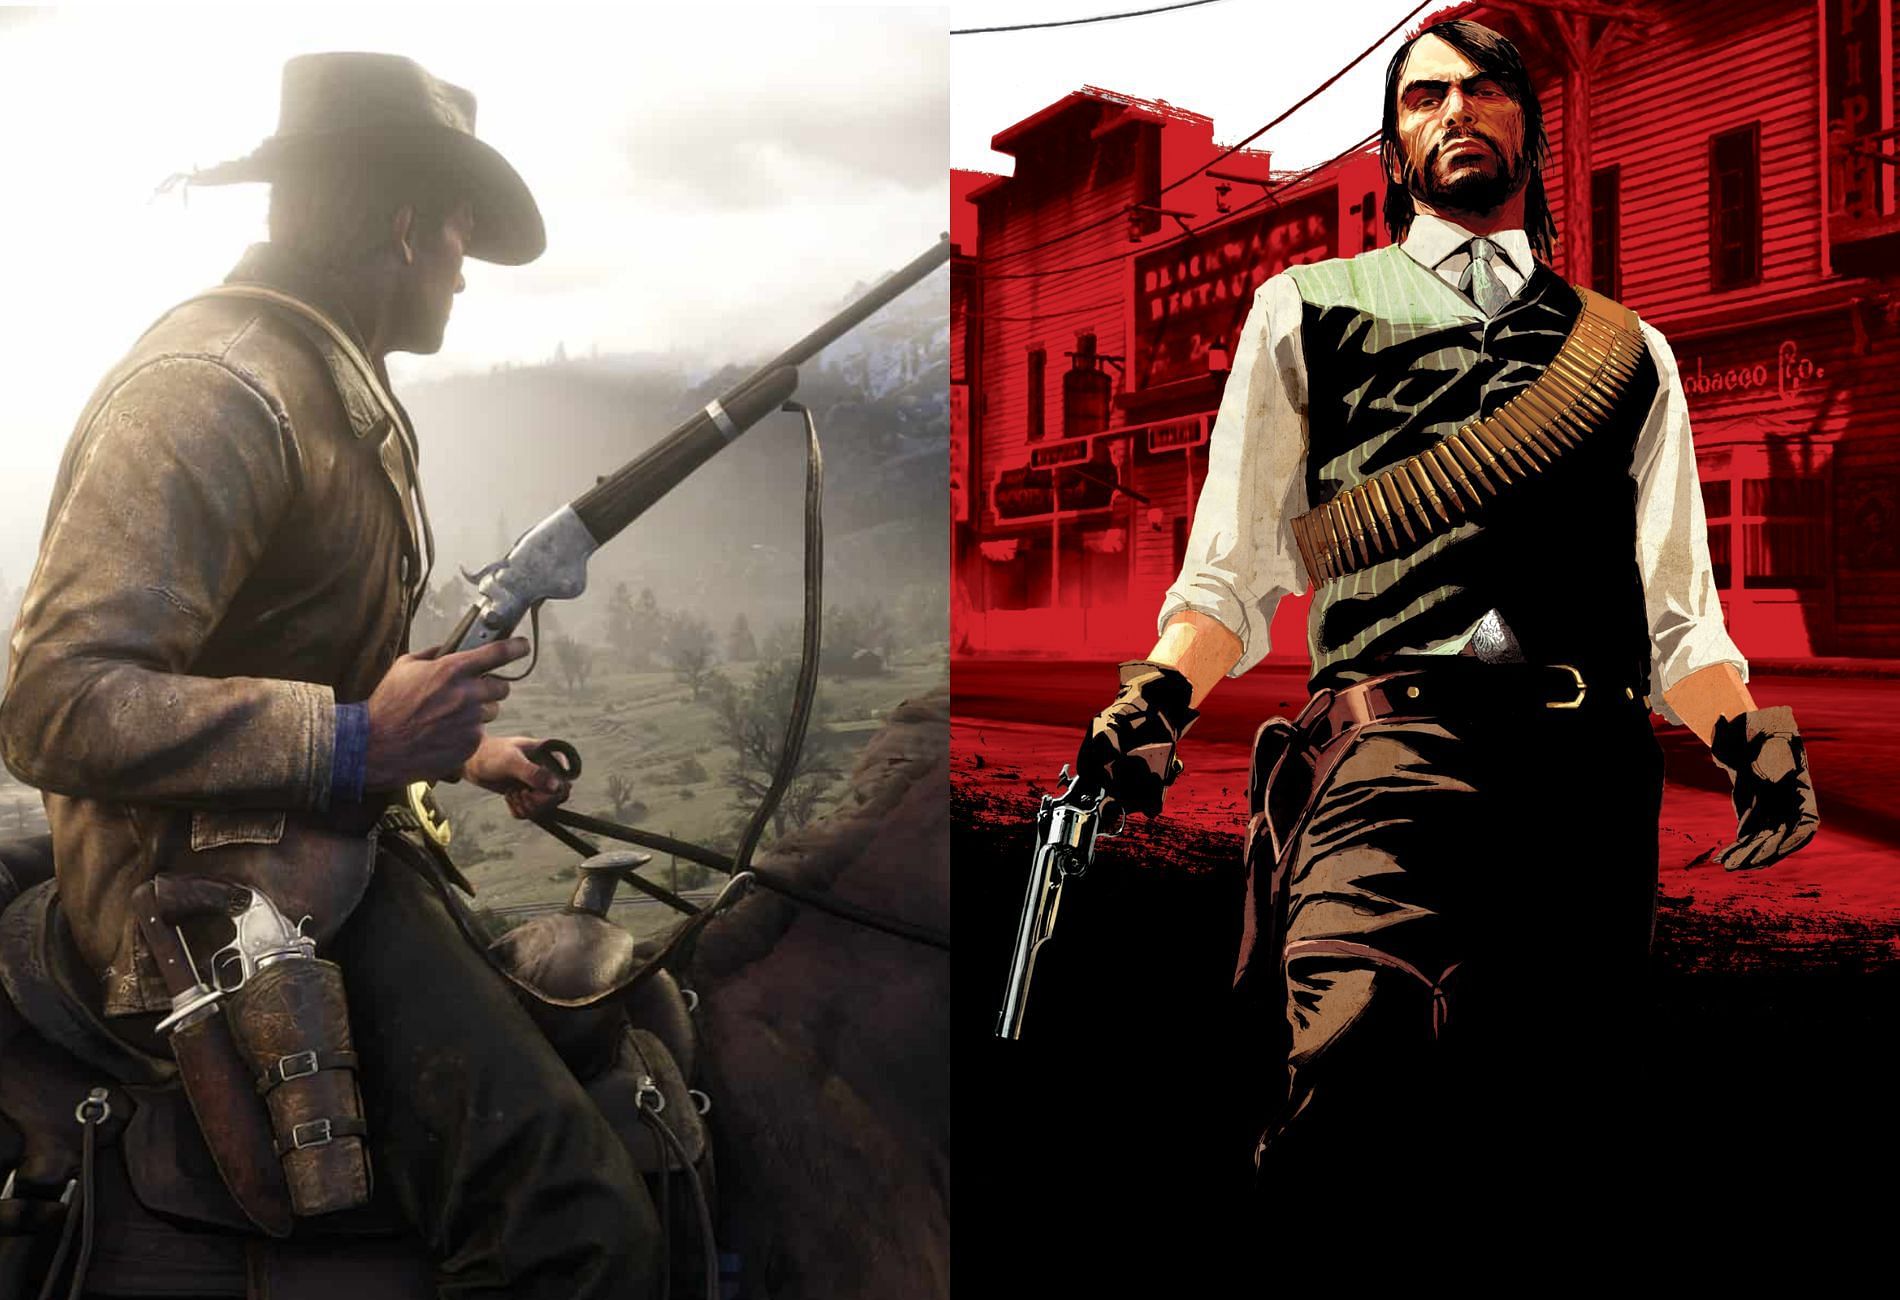 Who could be the protagonist of a Red Dead Redemption 3? - Quora